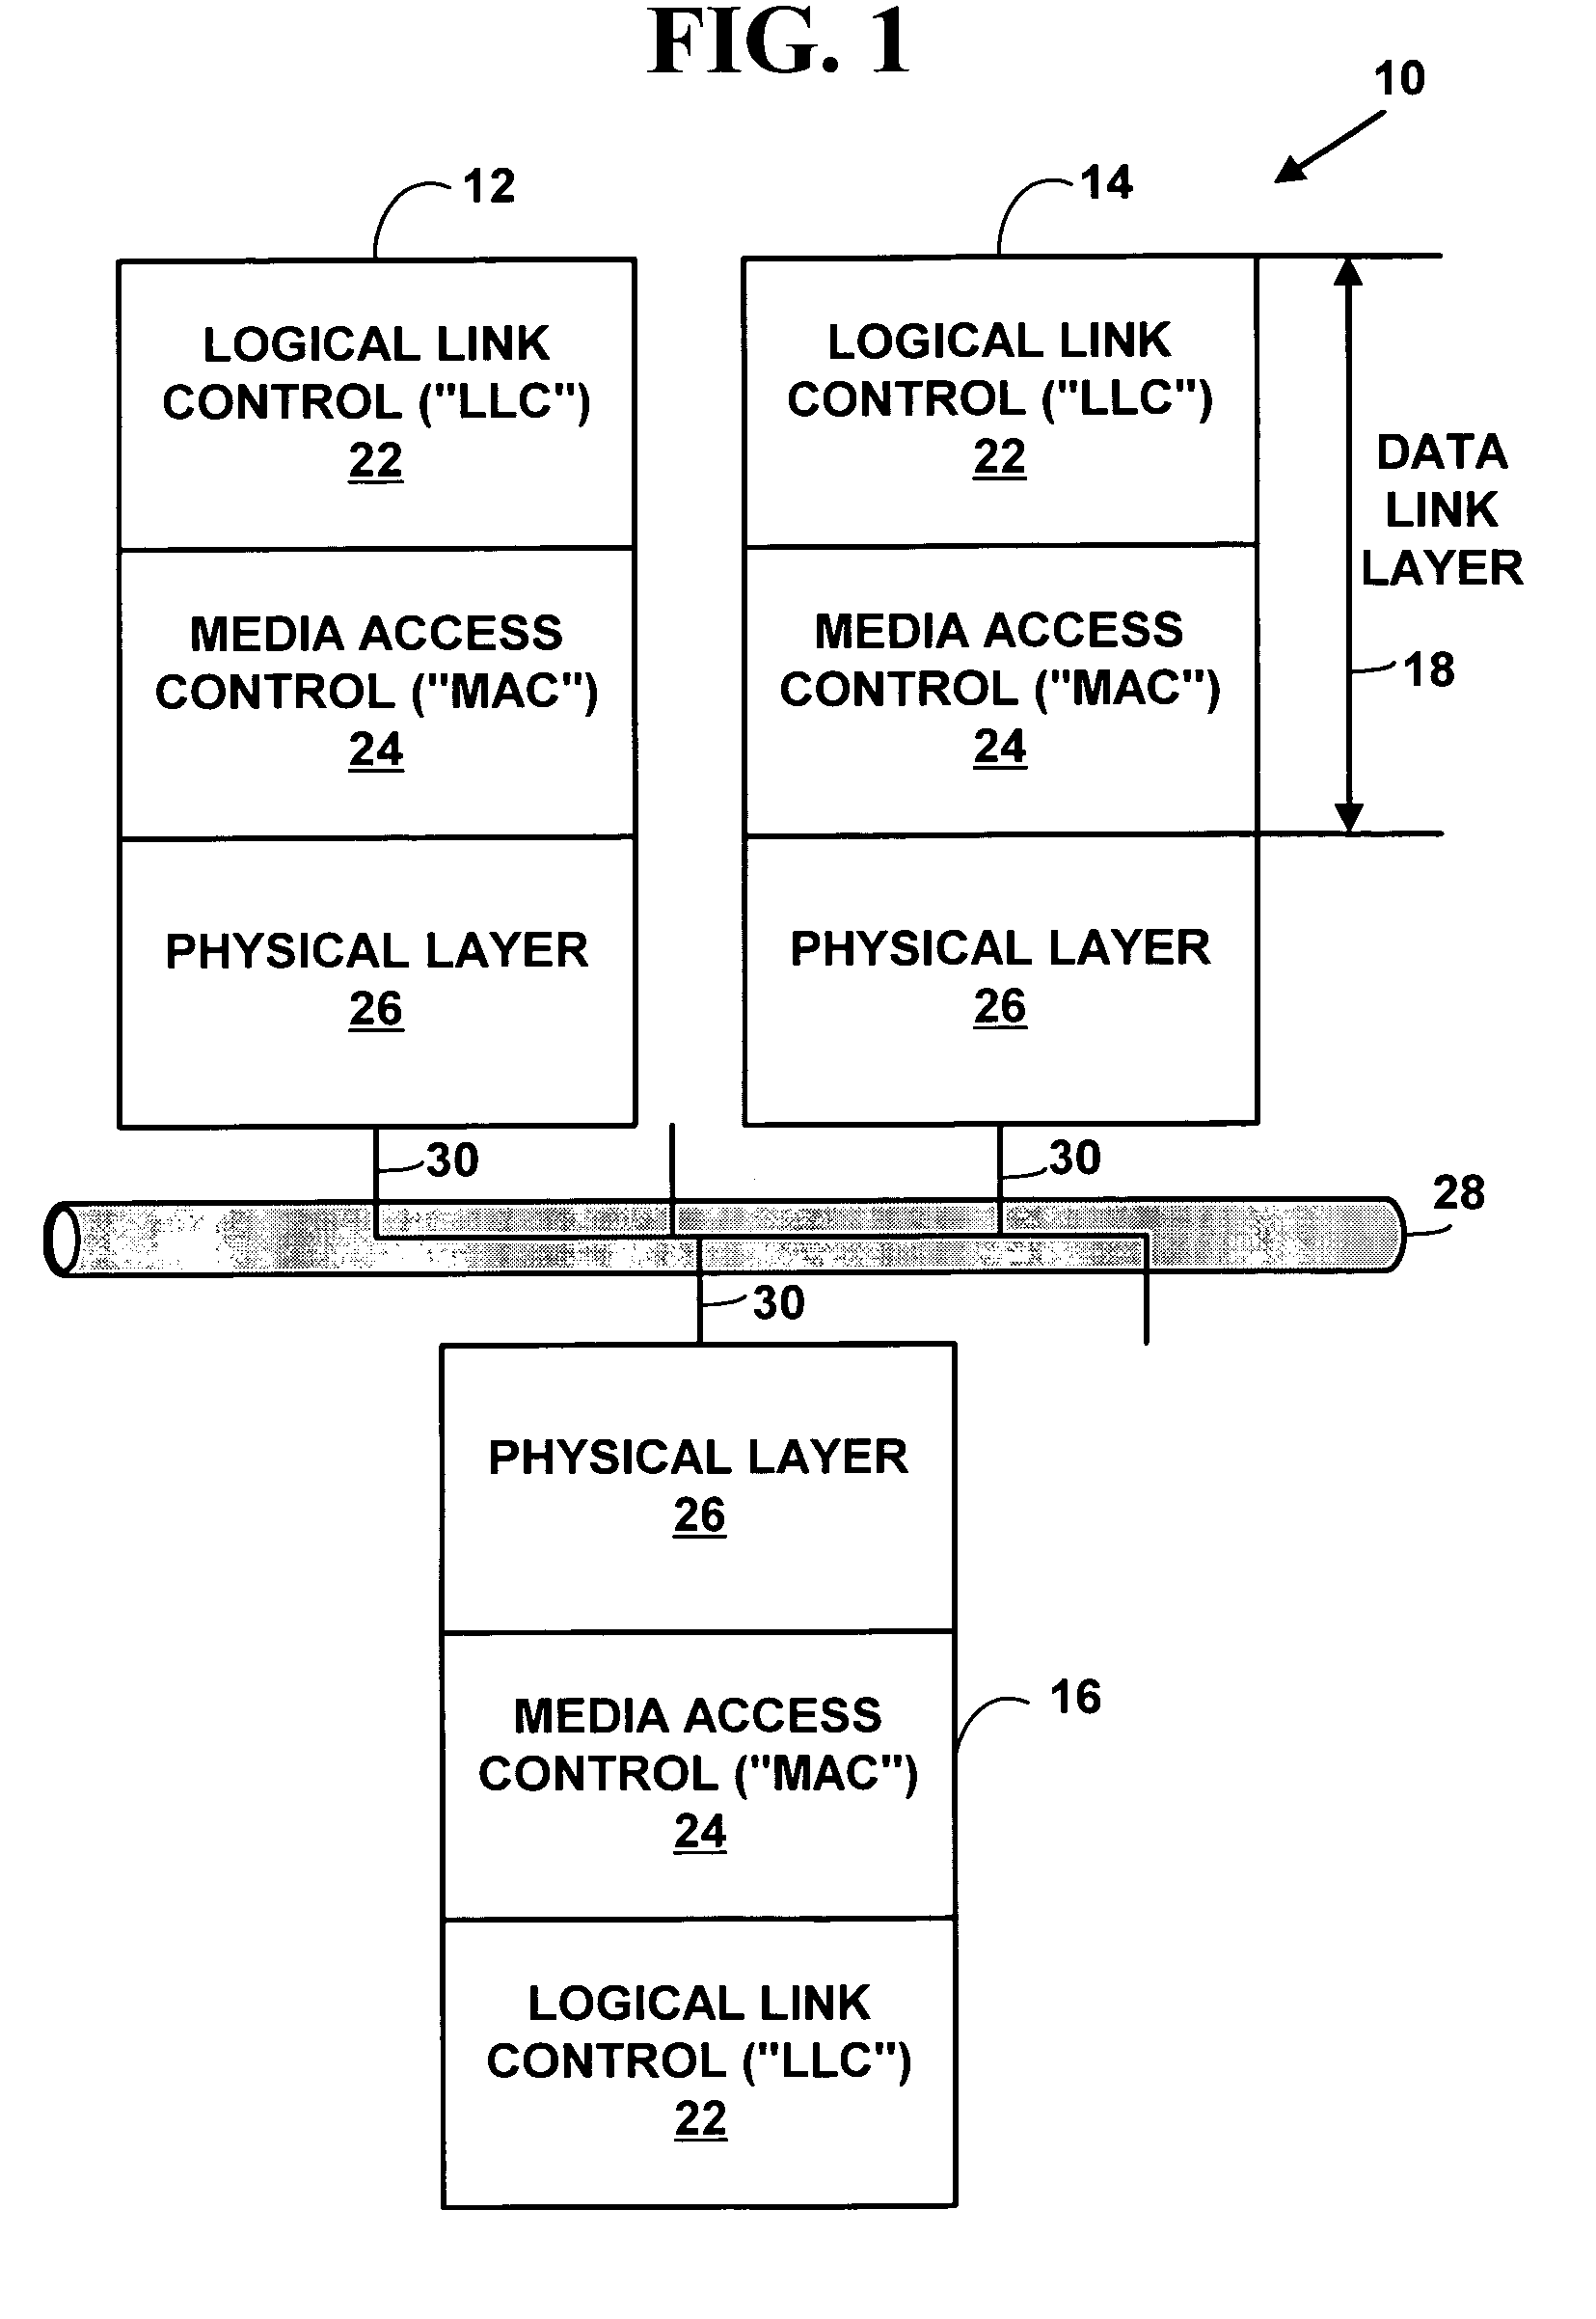 Method and protocol for a medium access control layer for local area networks with multiple-priority traffic